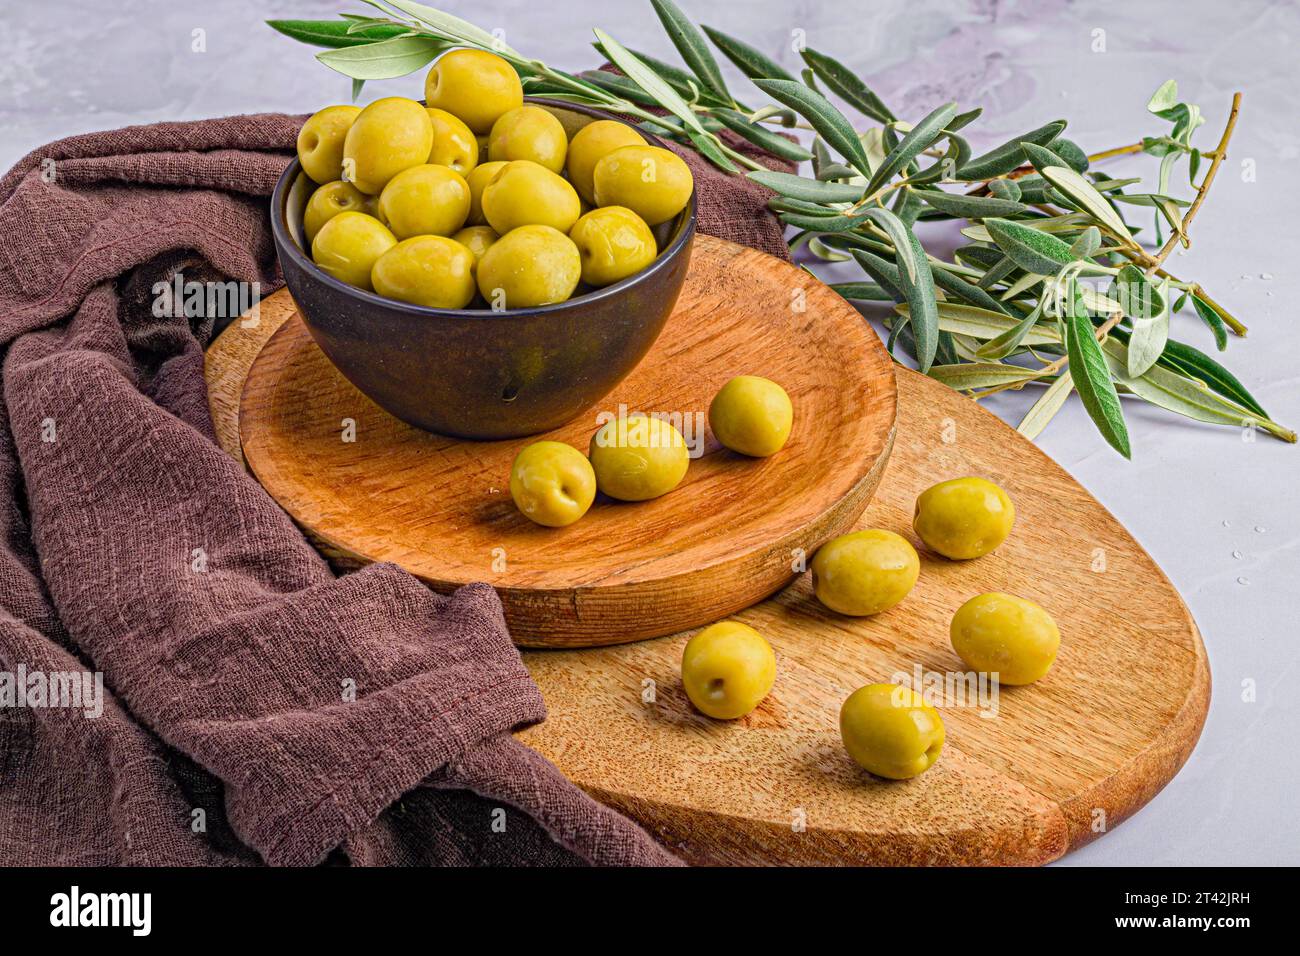 A wooden board with an array of ripe green Manzanilla Olives and other decorations Stock Photo